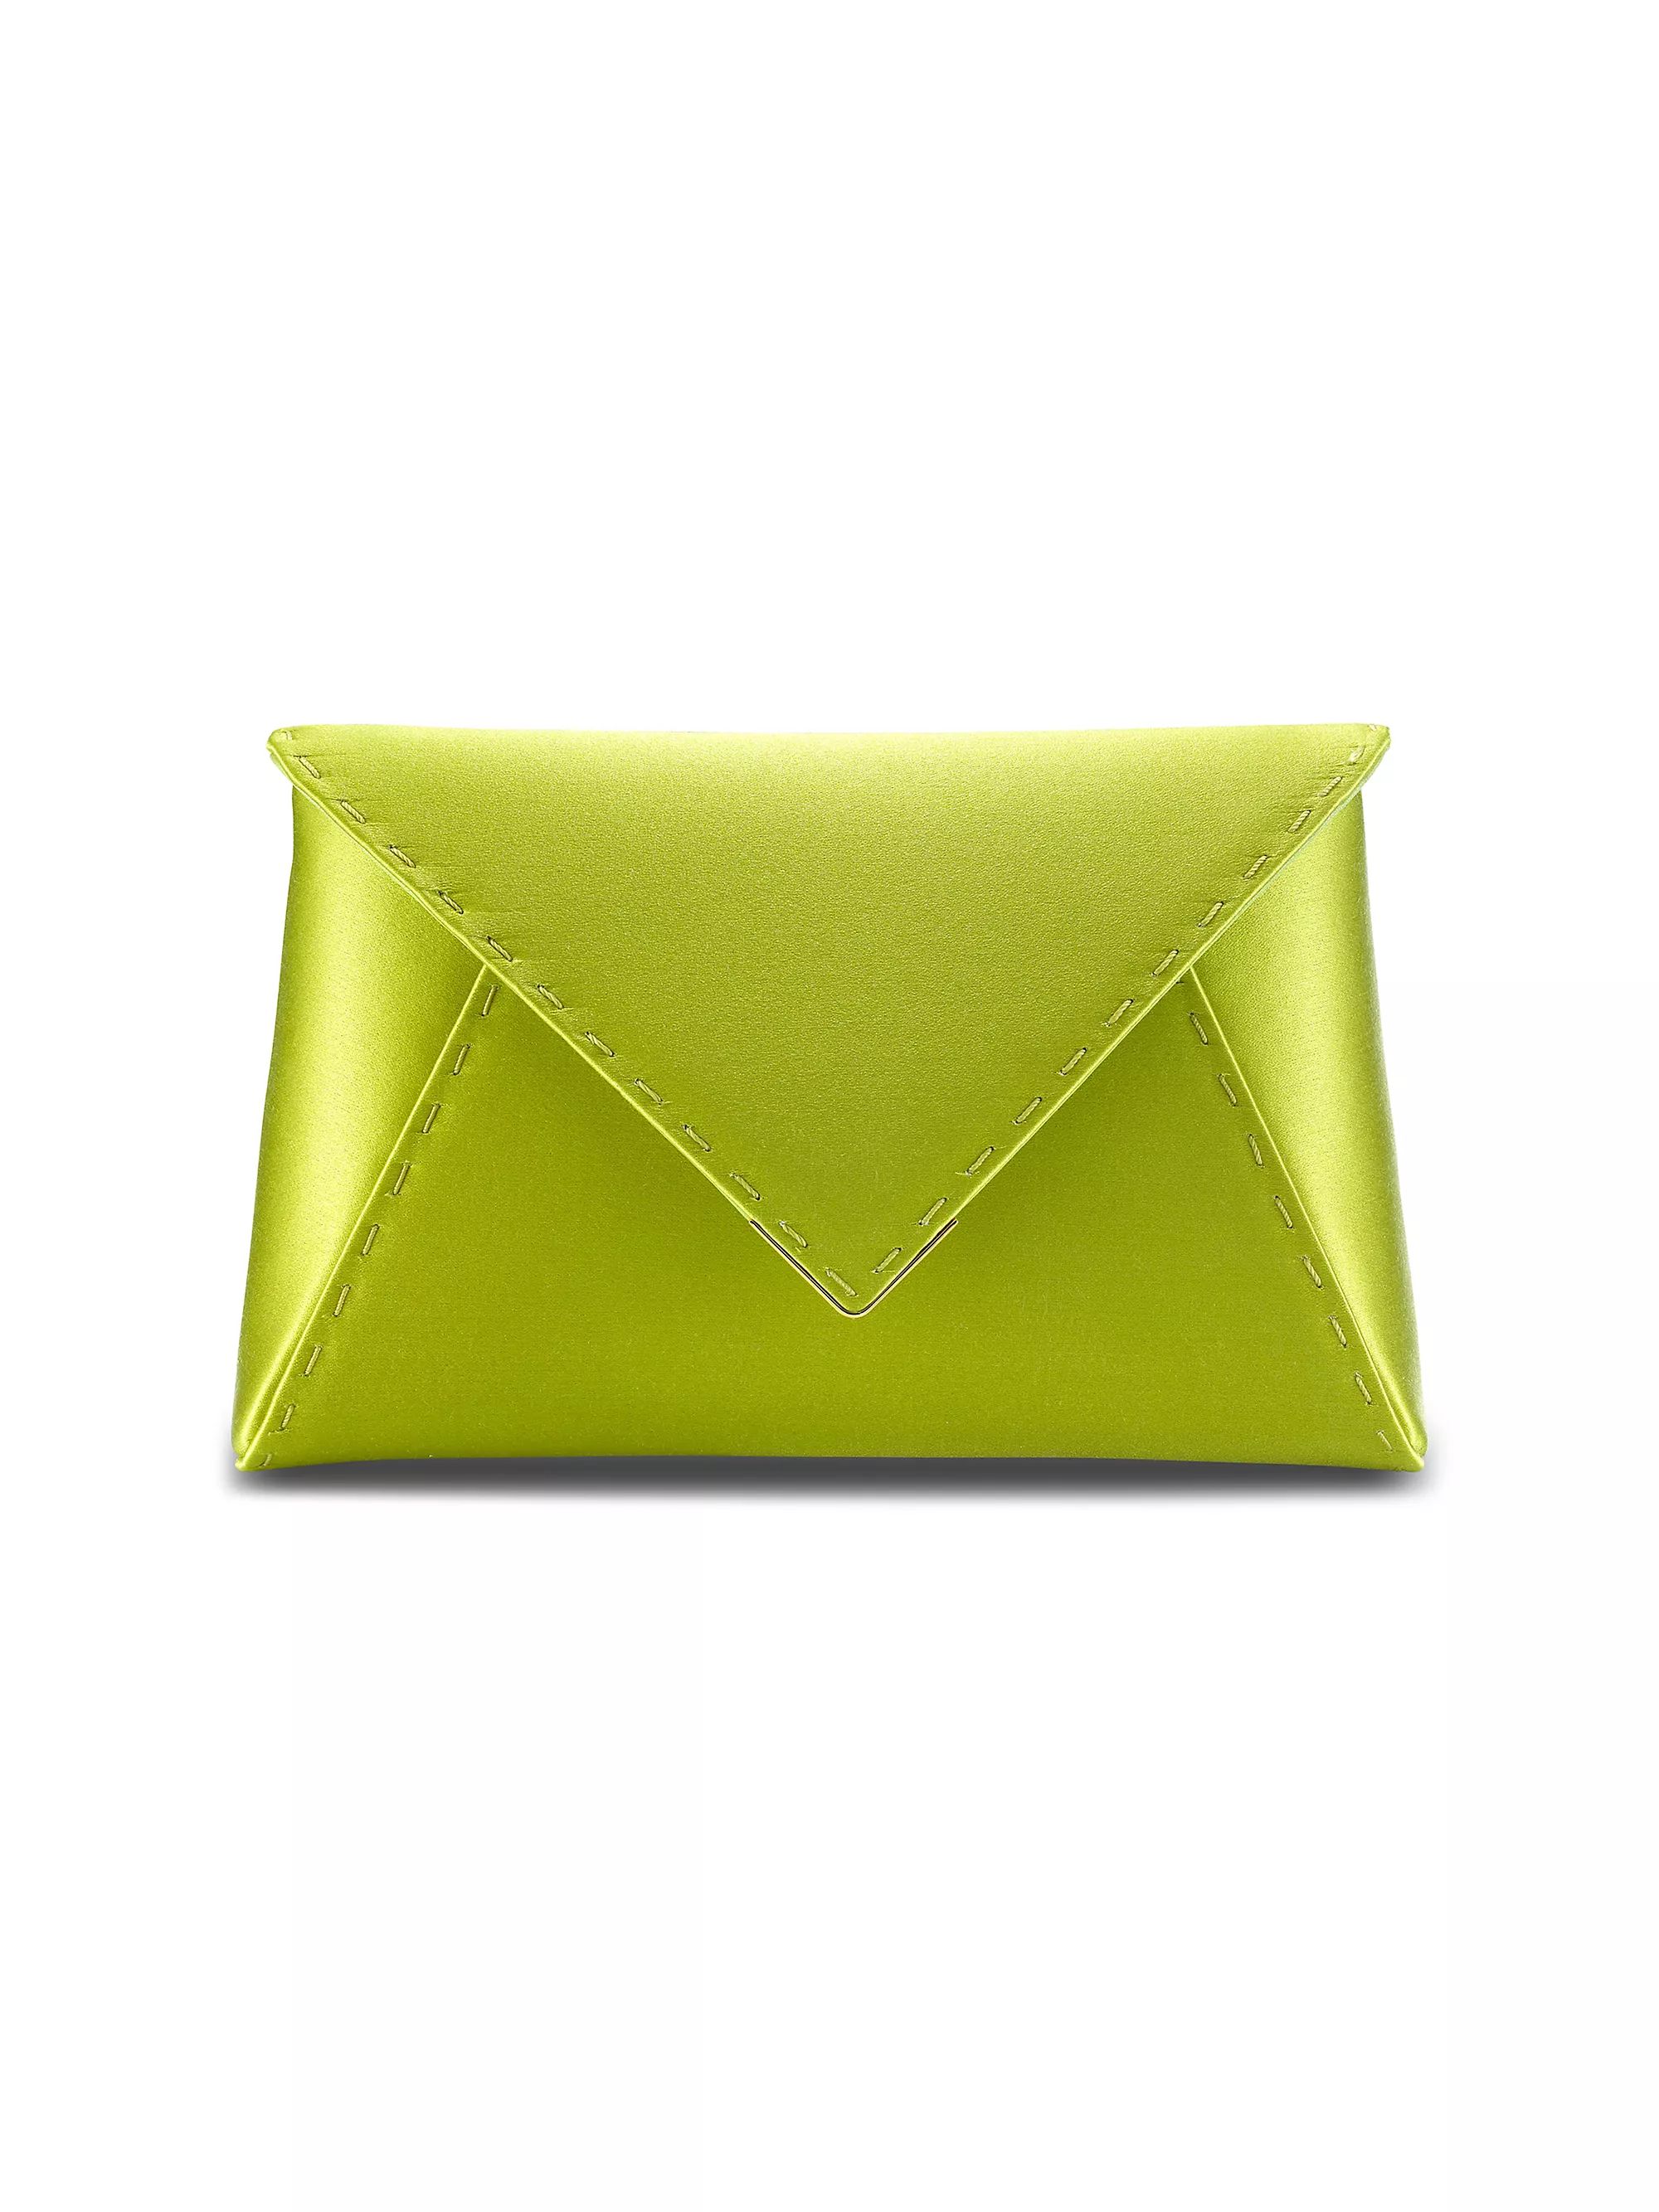 Lee Pouchet Small Satin with Gold Hardware | Saks Fifth Avenue